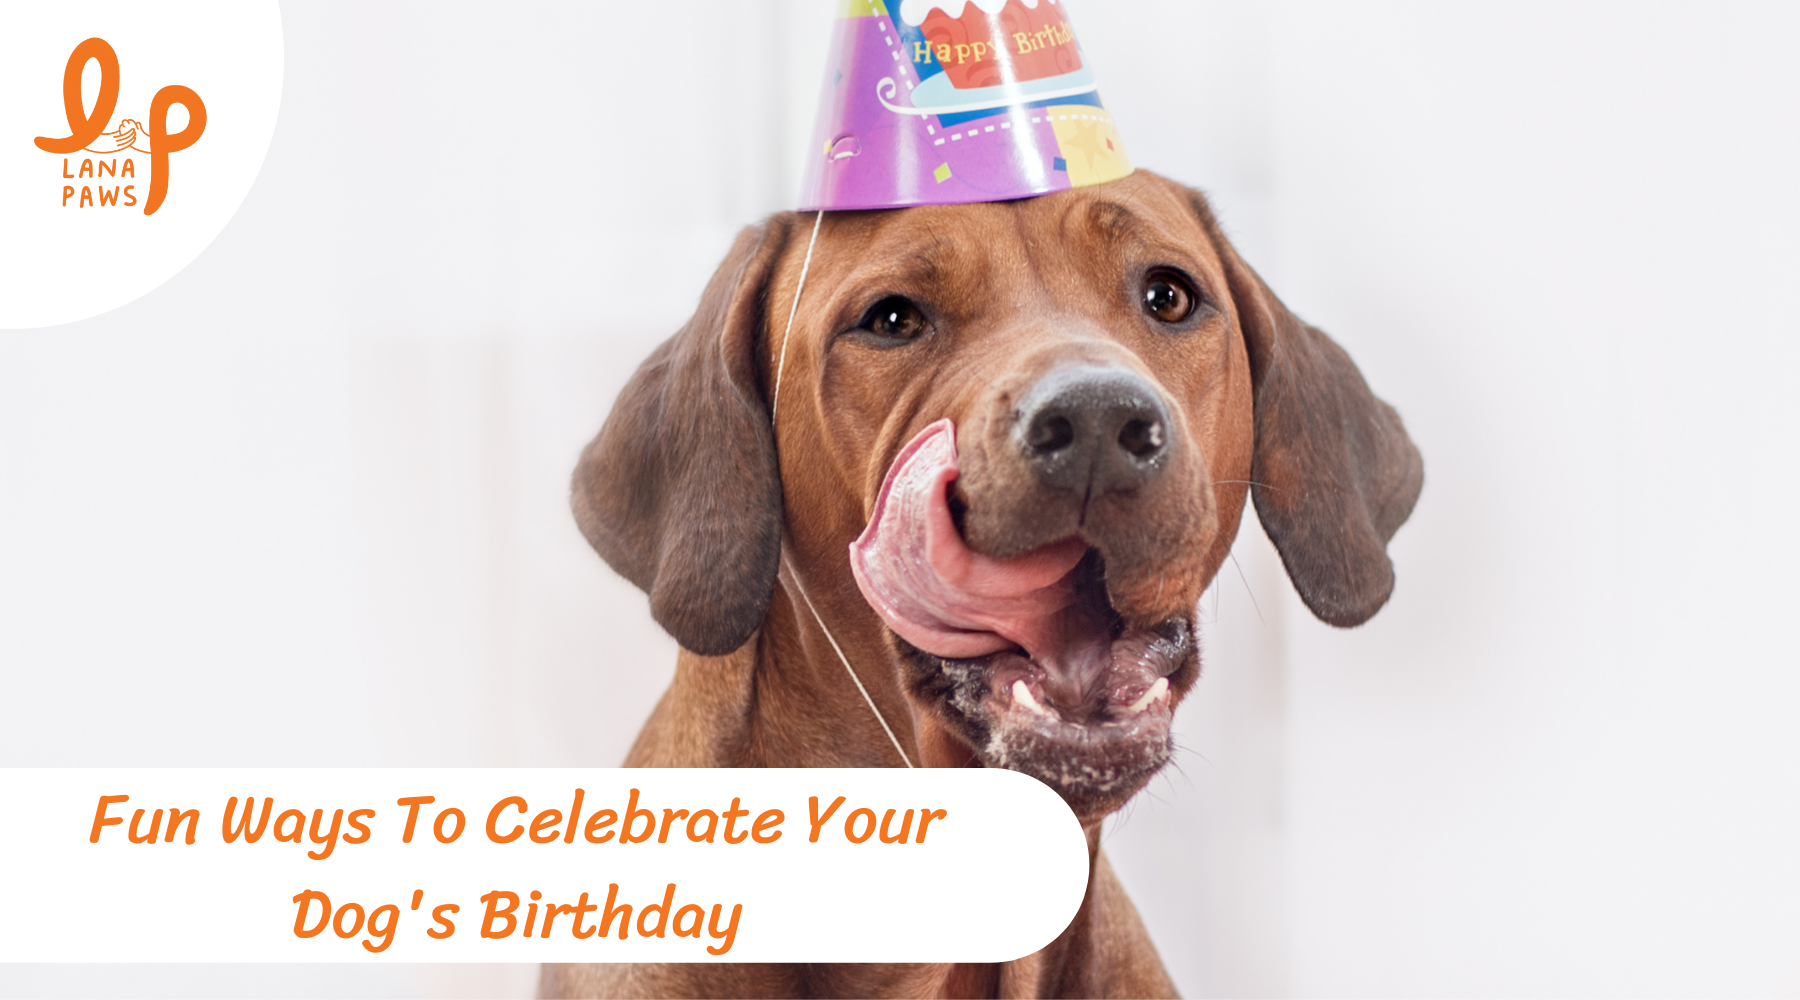 Lana Paws blog on how to celebrate your dog's birthday